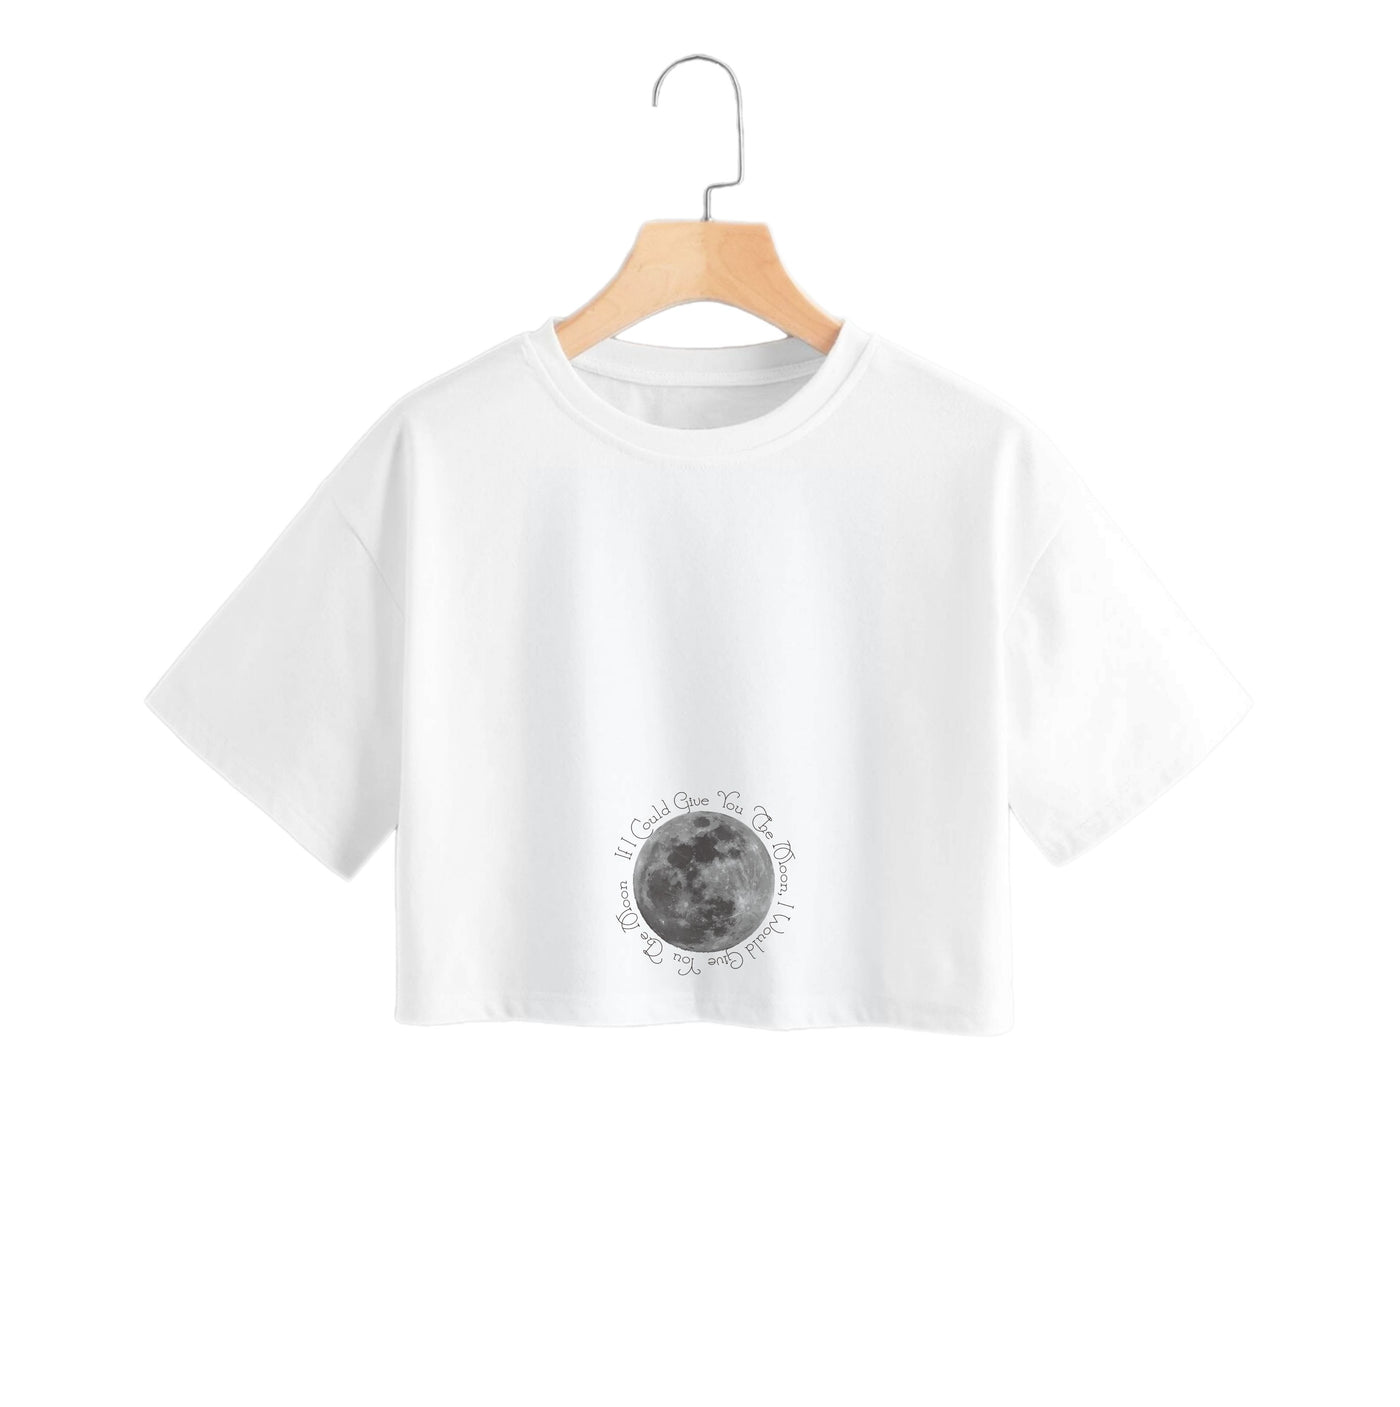 If I Could Give You The Moon - Phoebe Bridgers Crop Top